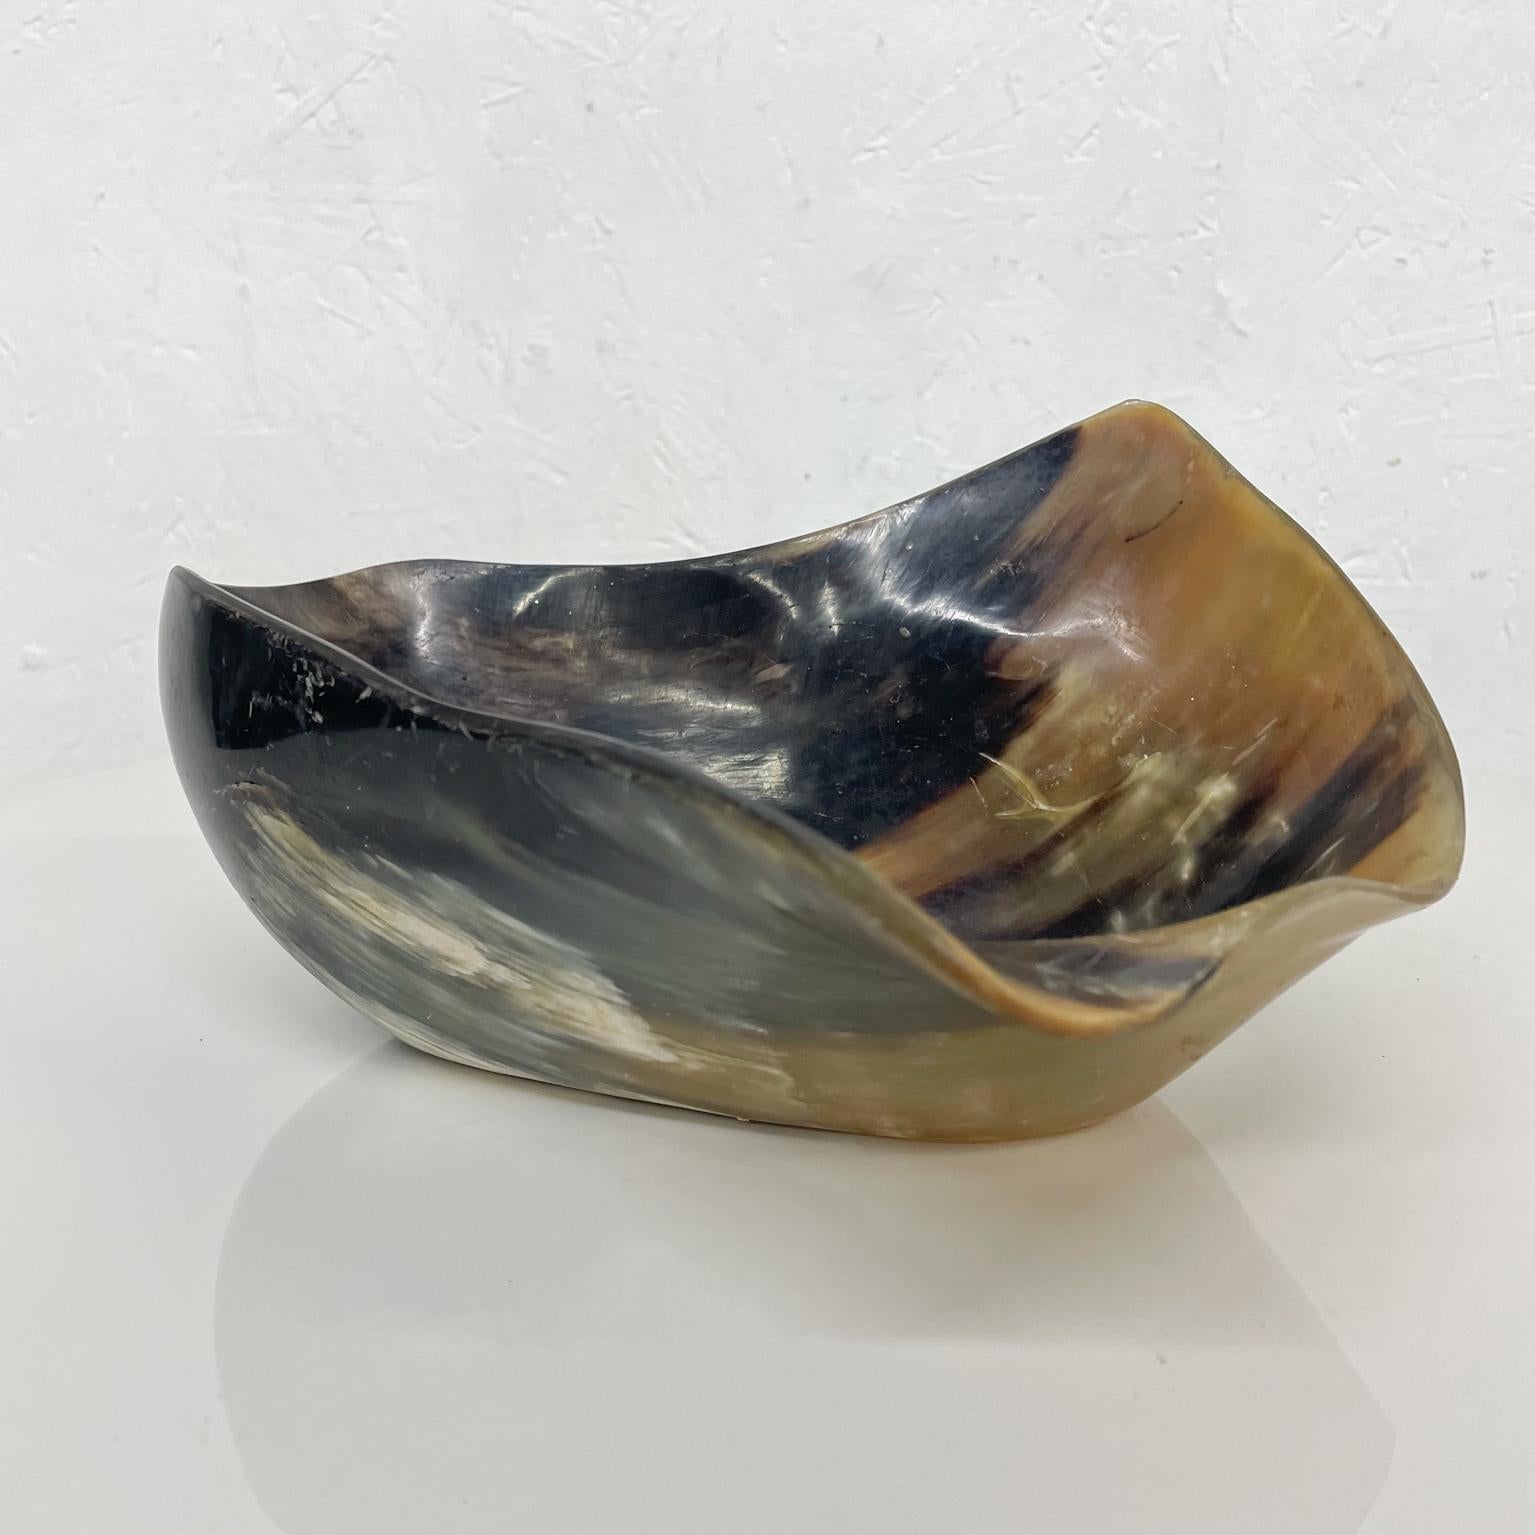 Sculptural Horn Bowl 1950s Austria
Unmarked
4.75 H x 9.75 D x 8.5 inches
Unrestored Vintage preowned condition Wear use & patina present. 
Not perfect, it is vintage.
Refer to images provided.


